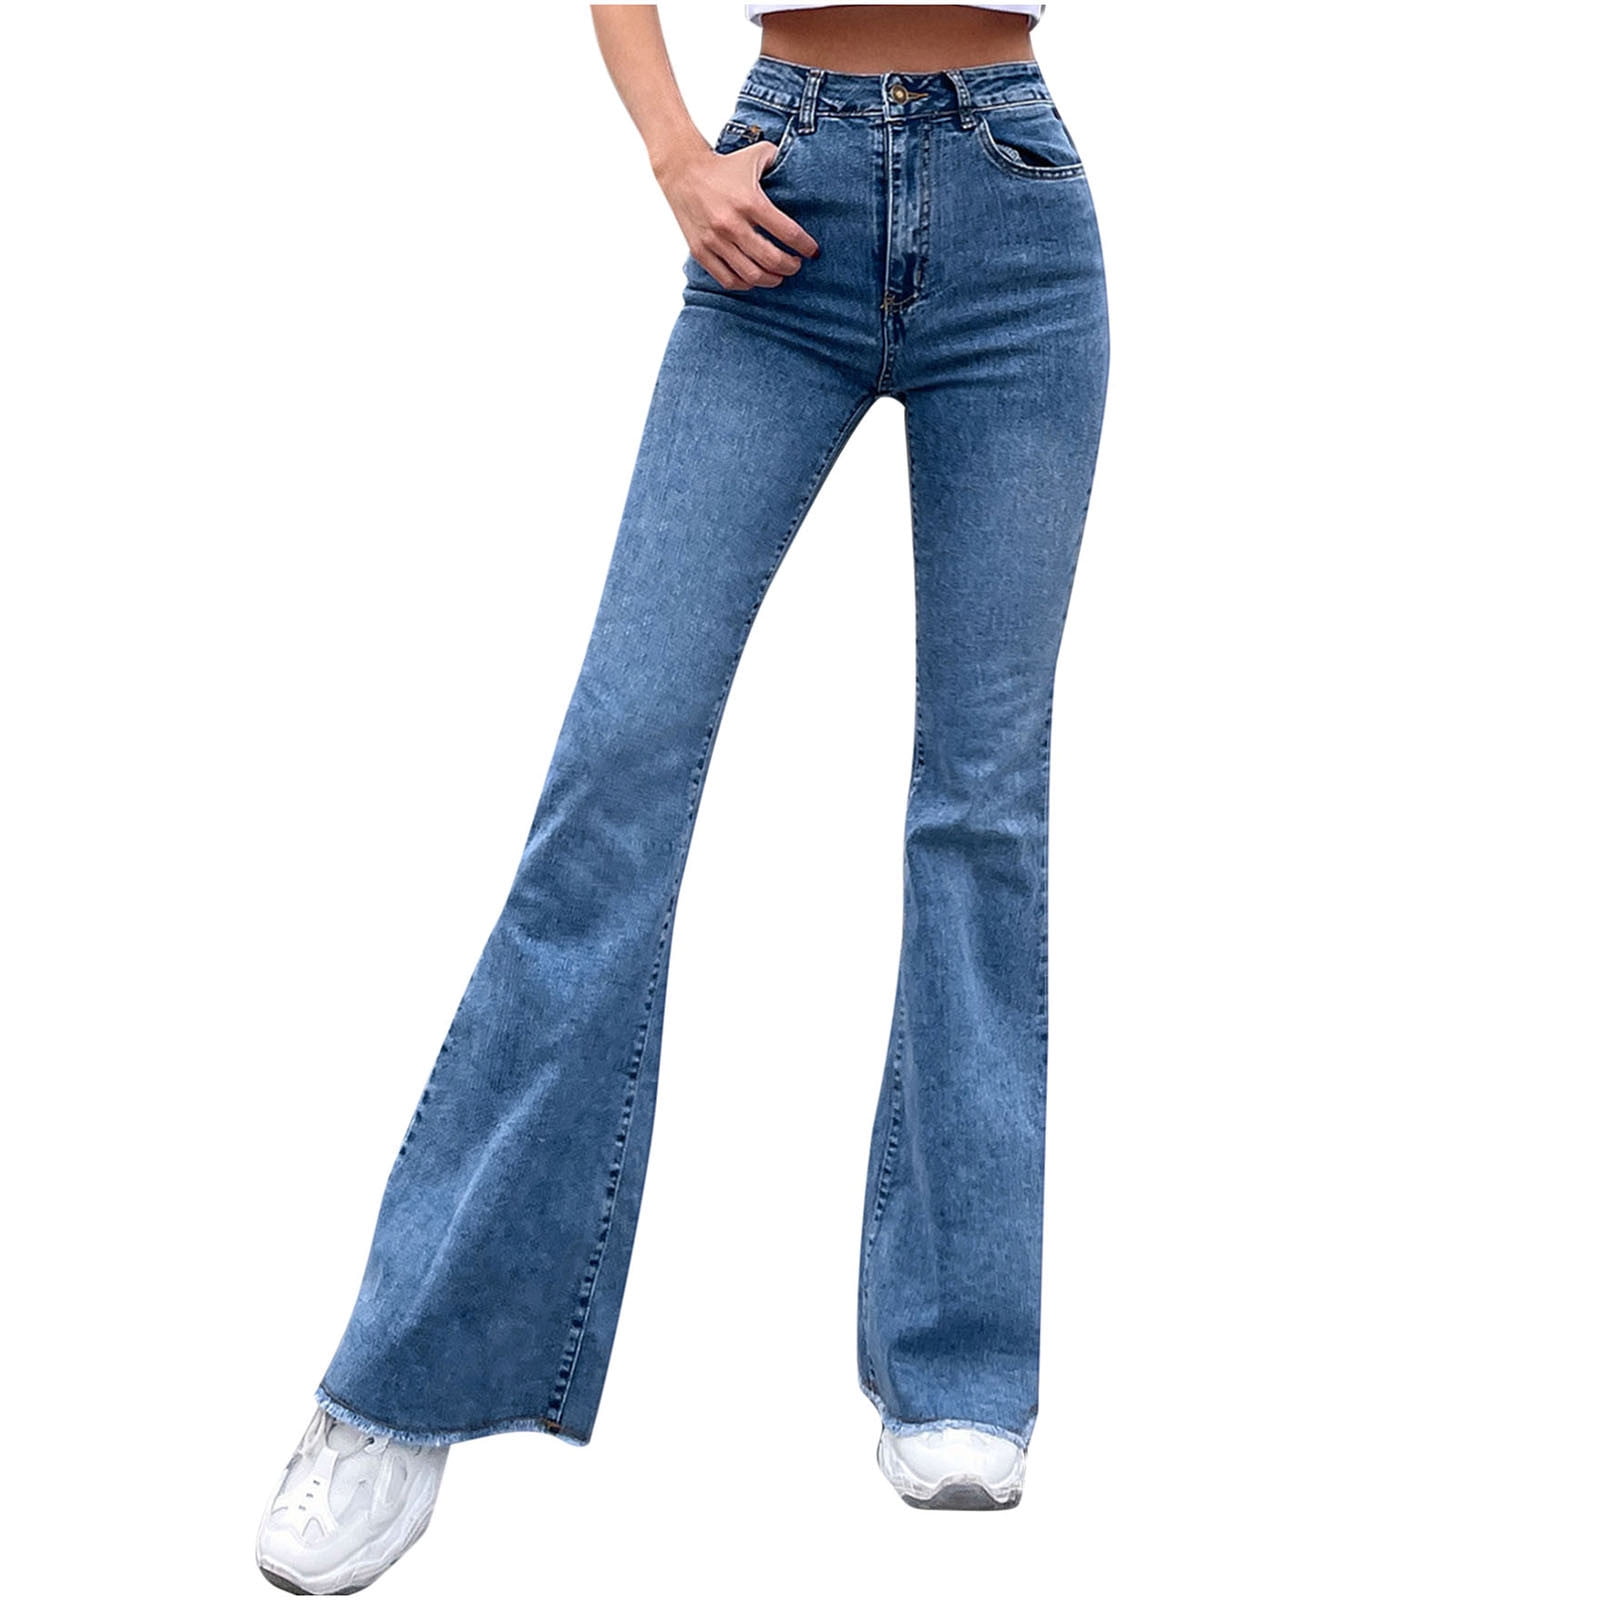 Women's Skinny Flare Jeans Ultra Stretch High Waisted Trendy Bootcut Pants  Slimming Wide Leg Classic Bellbottom Denim Pants